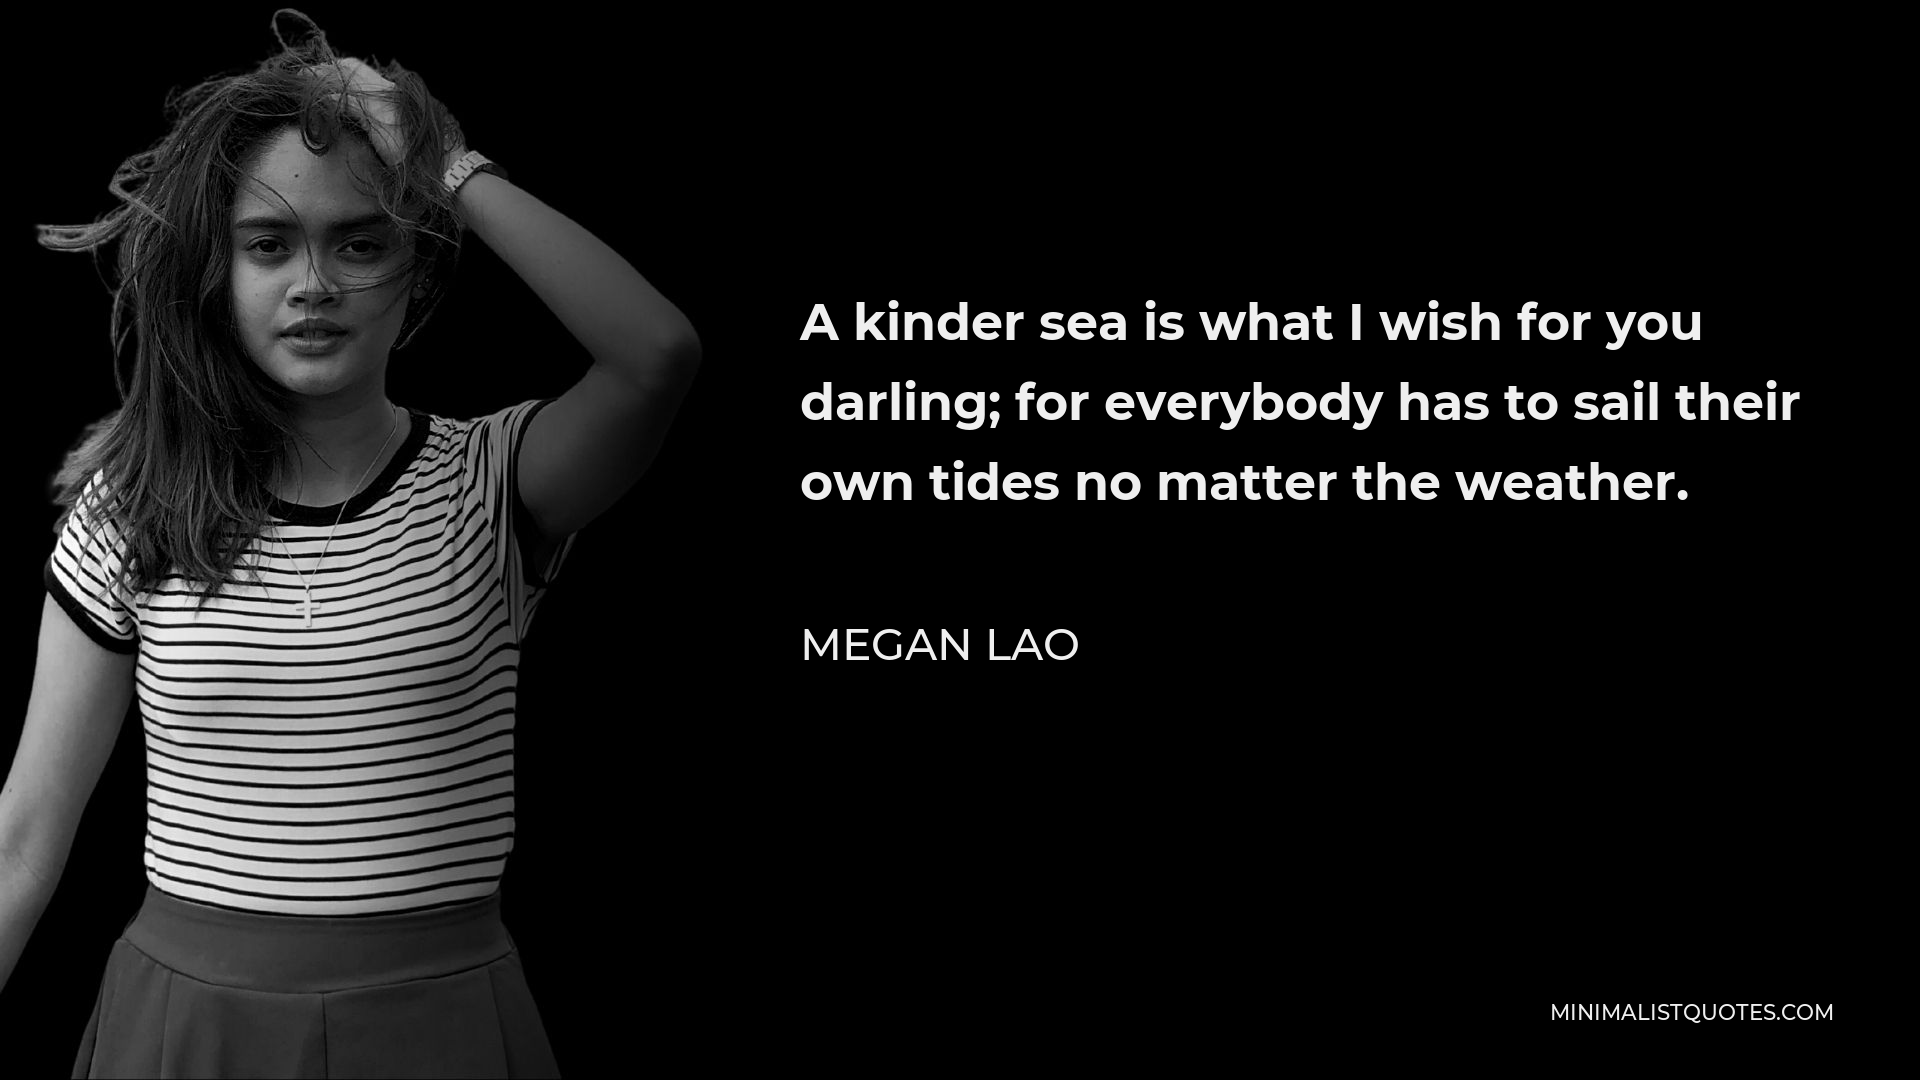 Megan Lao Quote - A kinder sea is what I wish for you darling; for everybody has to sail their own tides no matter the weather.